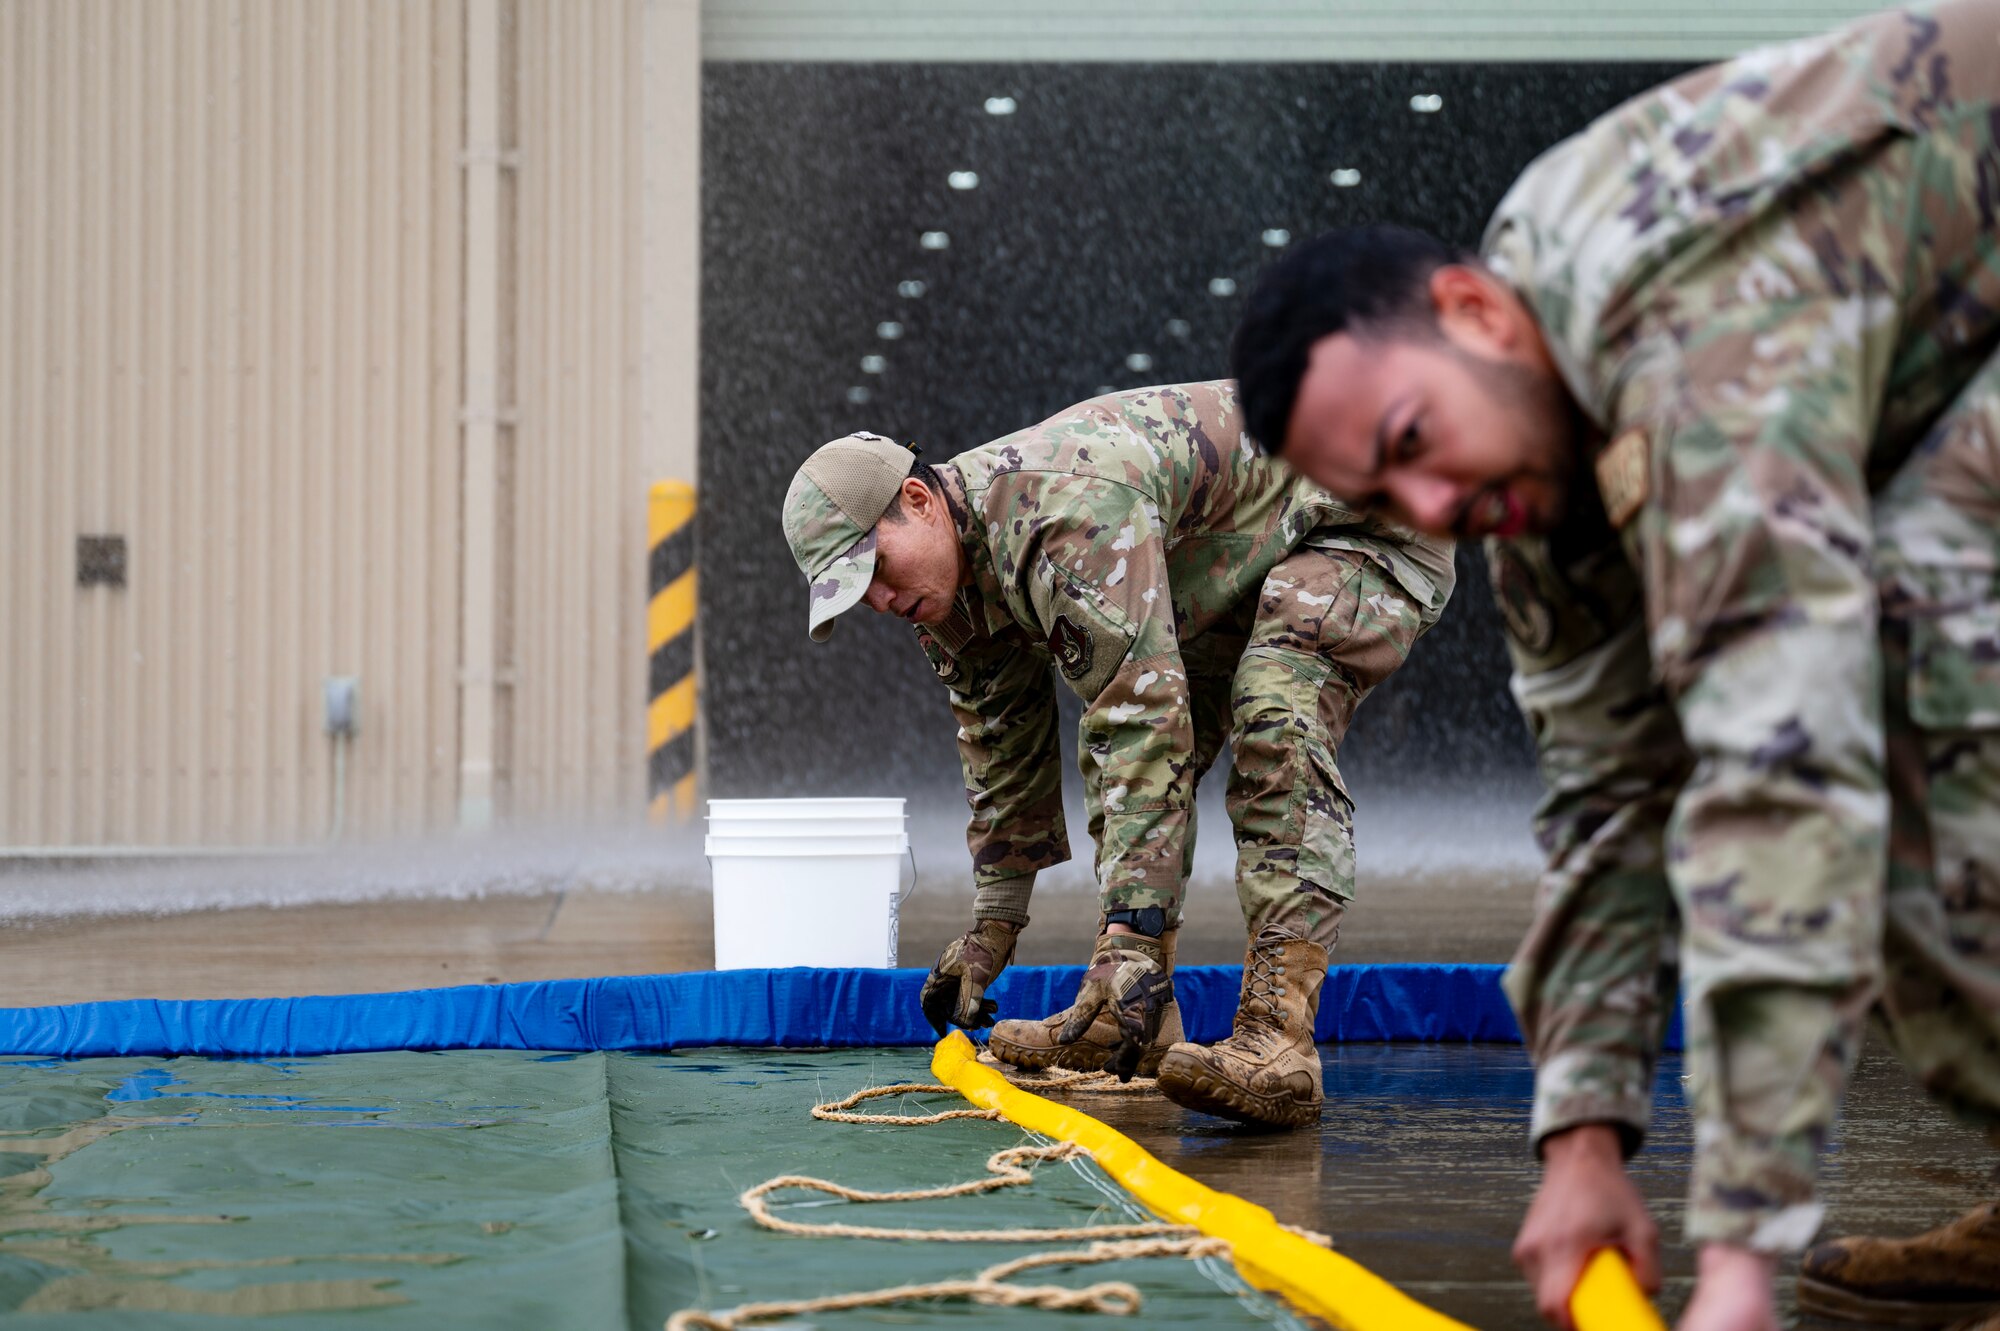 Two men conduct water mitigation procedures in a simulated storm during a Prime Base Engineer Emergency Force or “Prime BEEF” training at Kunsan Air Base